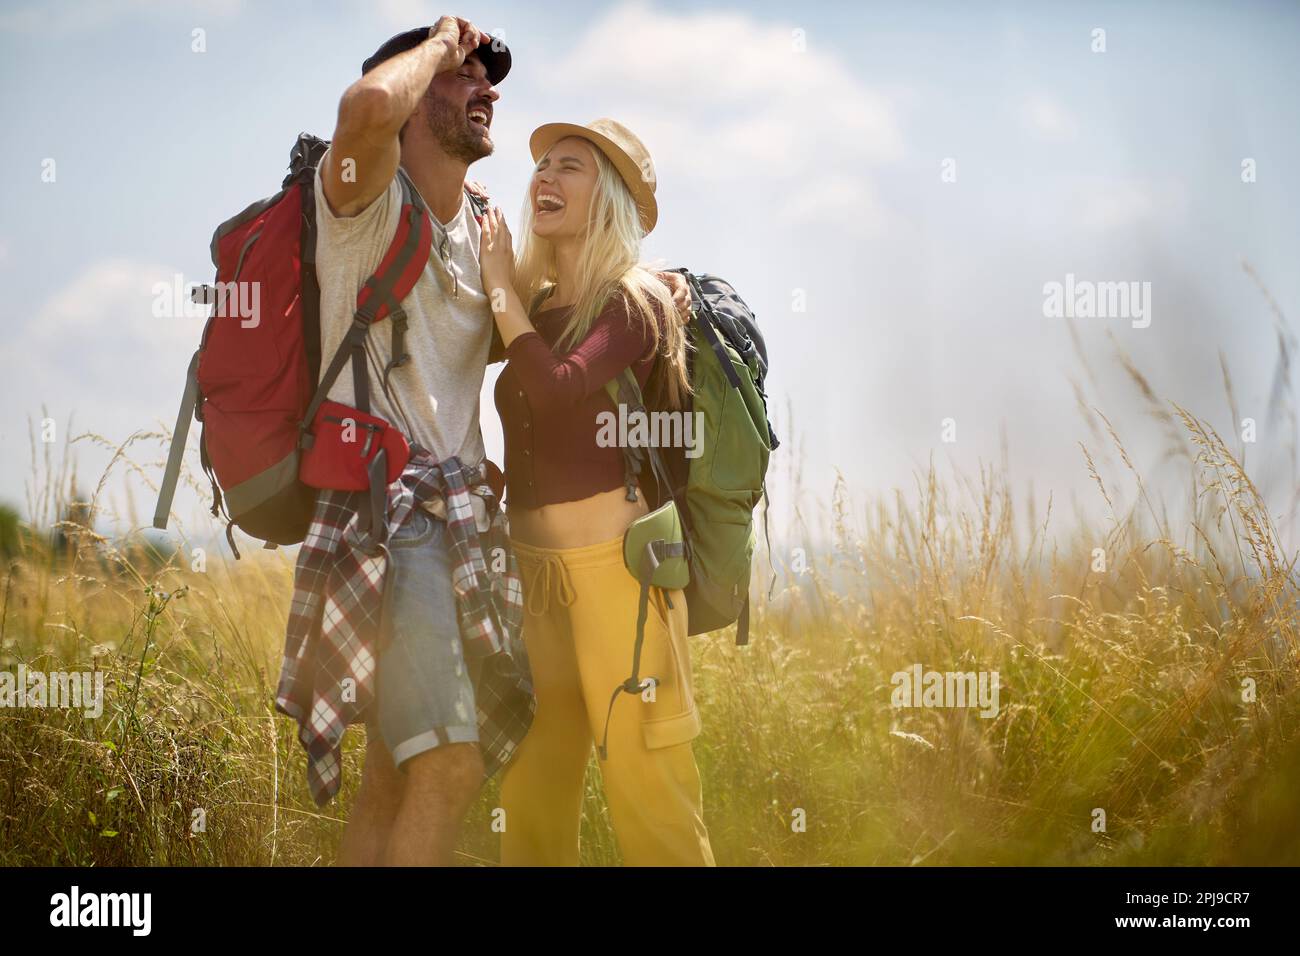 Freedom And love.smiling couple having fun Stock Photo